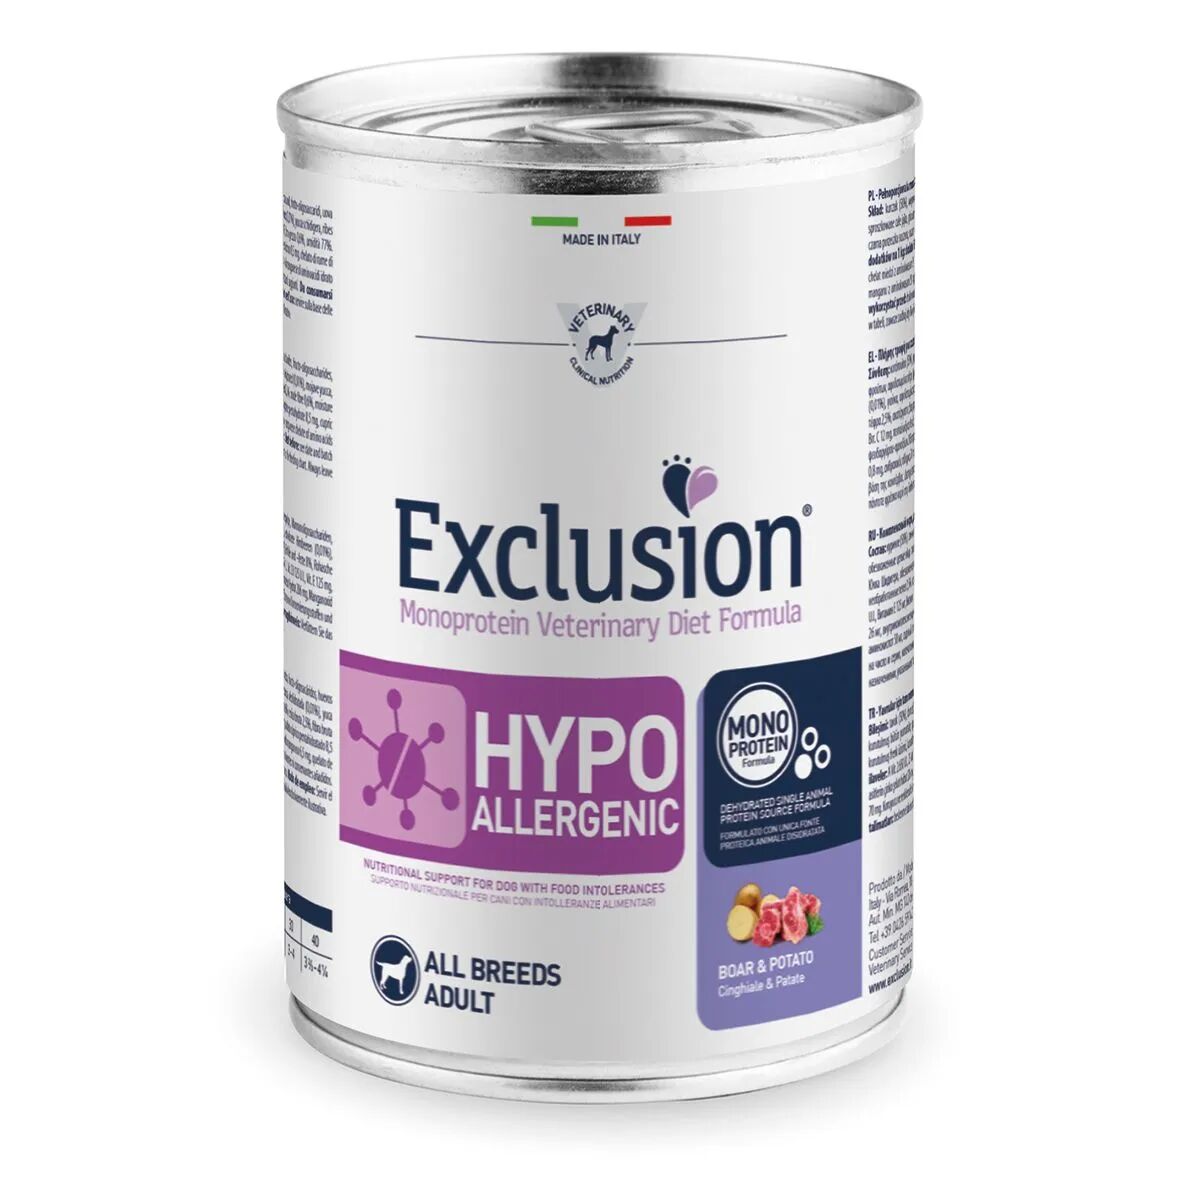 EXCLUSION Dog Diet Hypoallergenic All Breeds Lattina 400G CINGHIALE